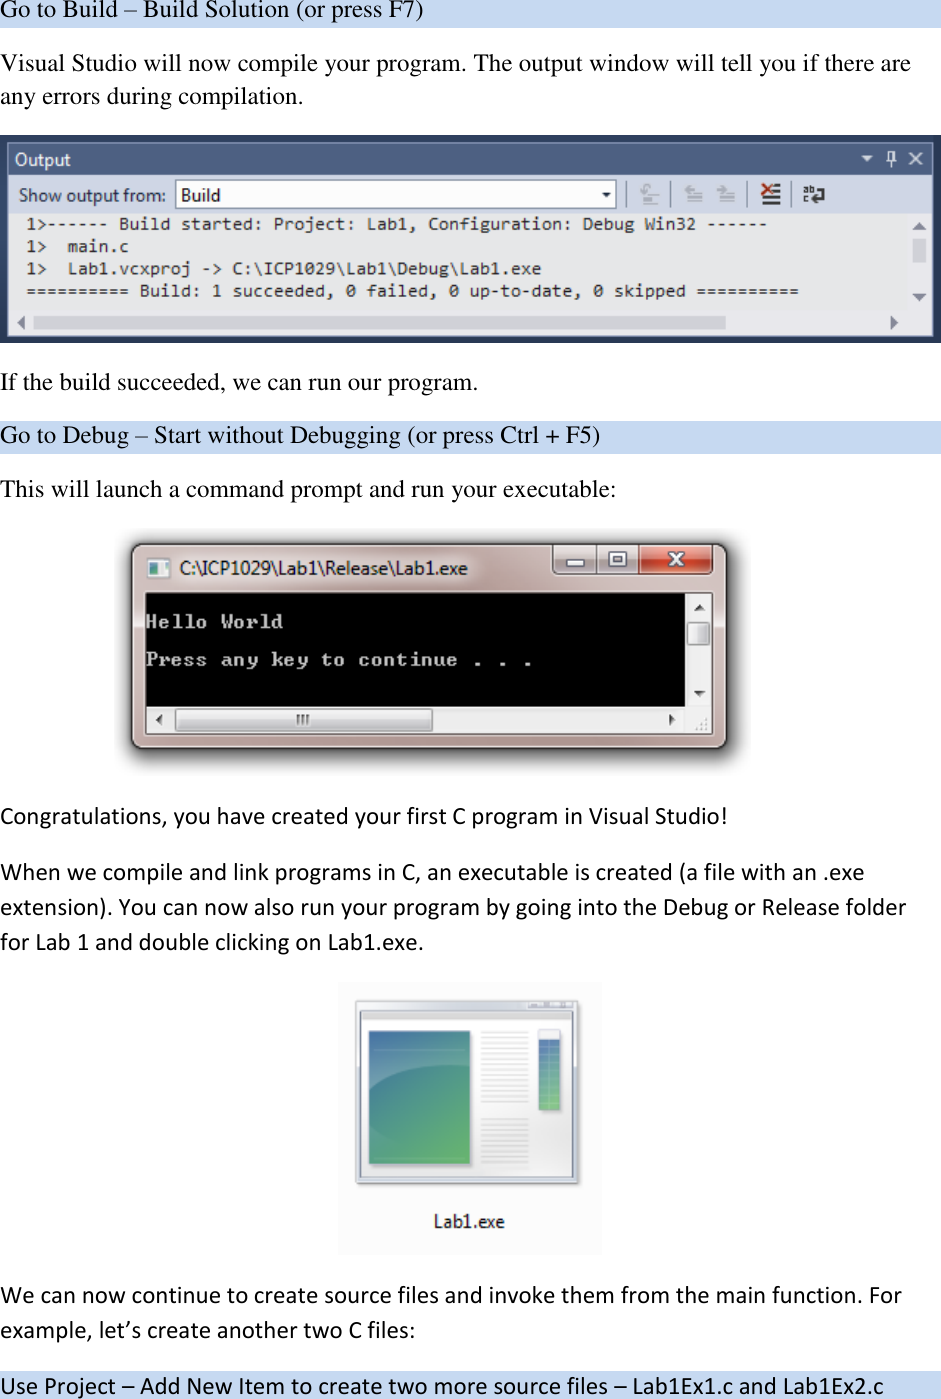 Page 5 of 7 - Visual Studio Guide